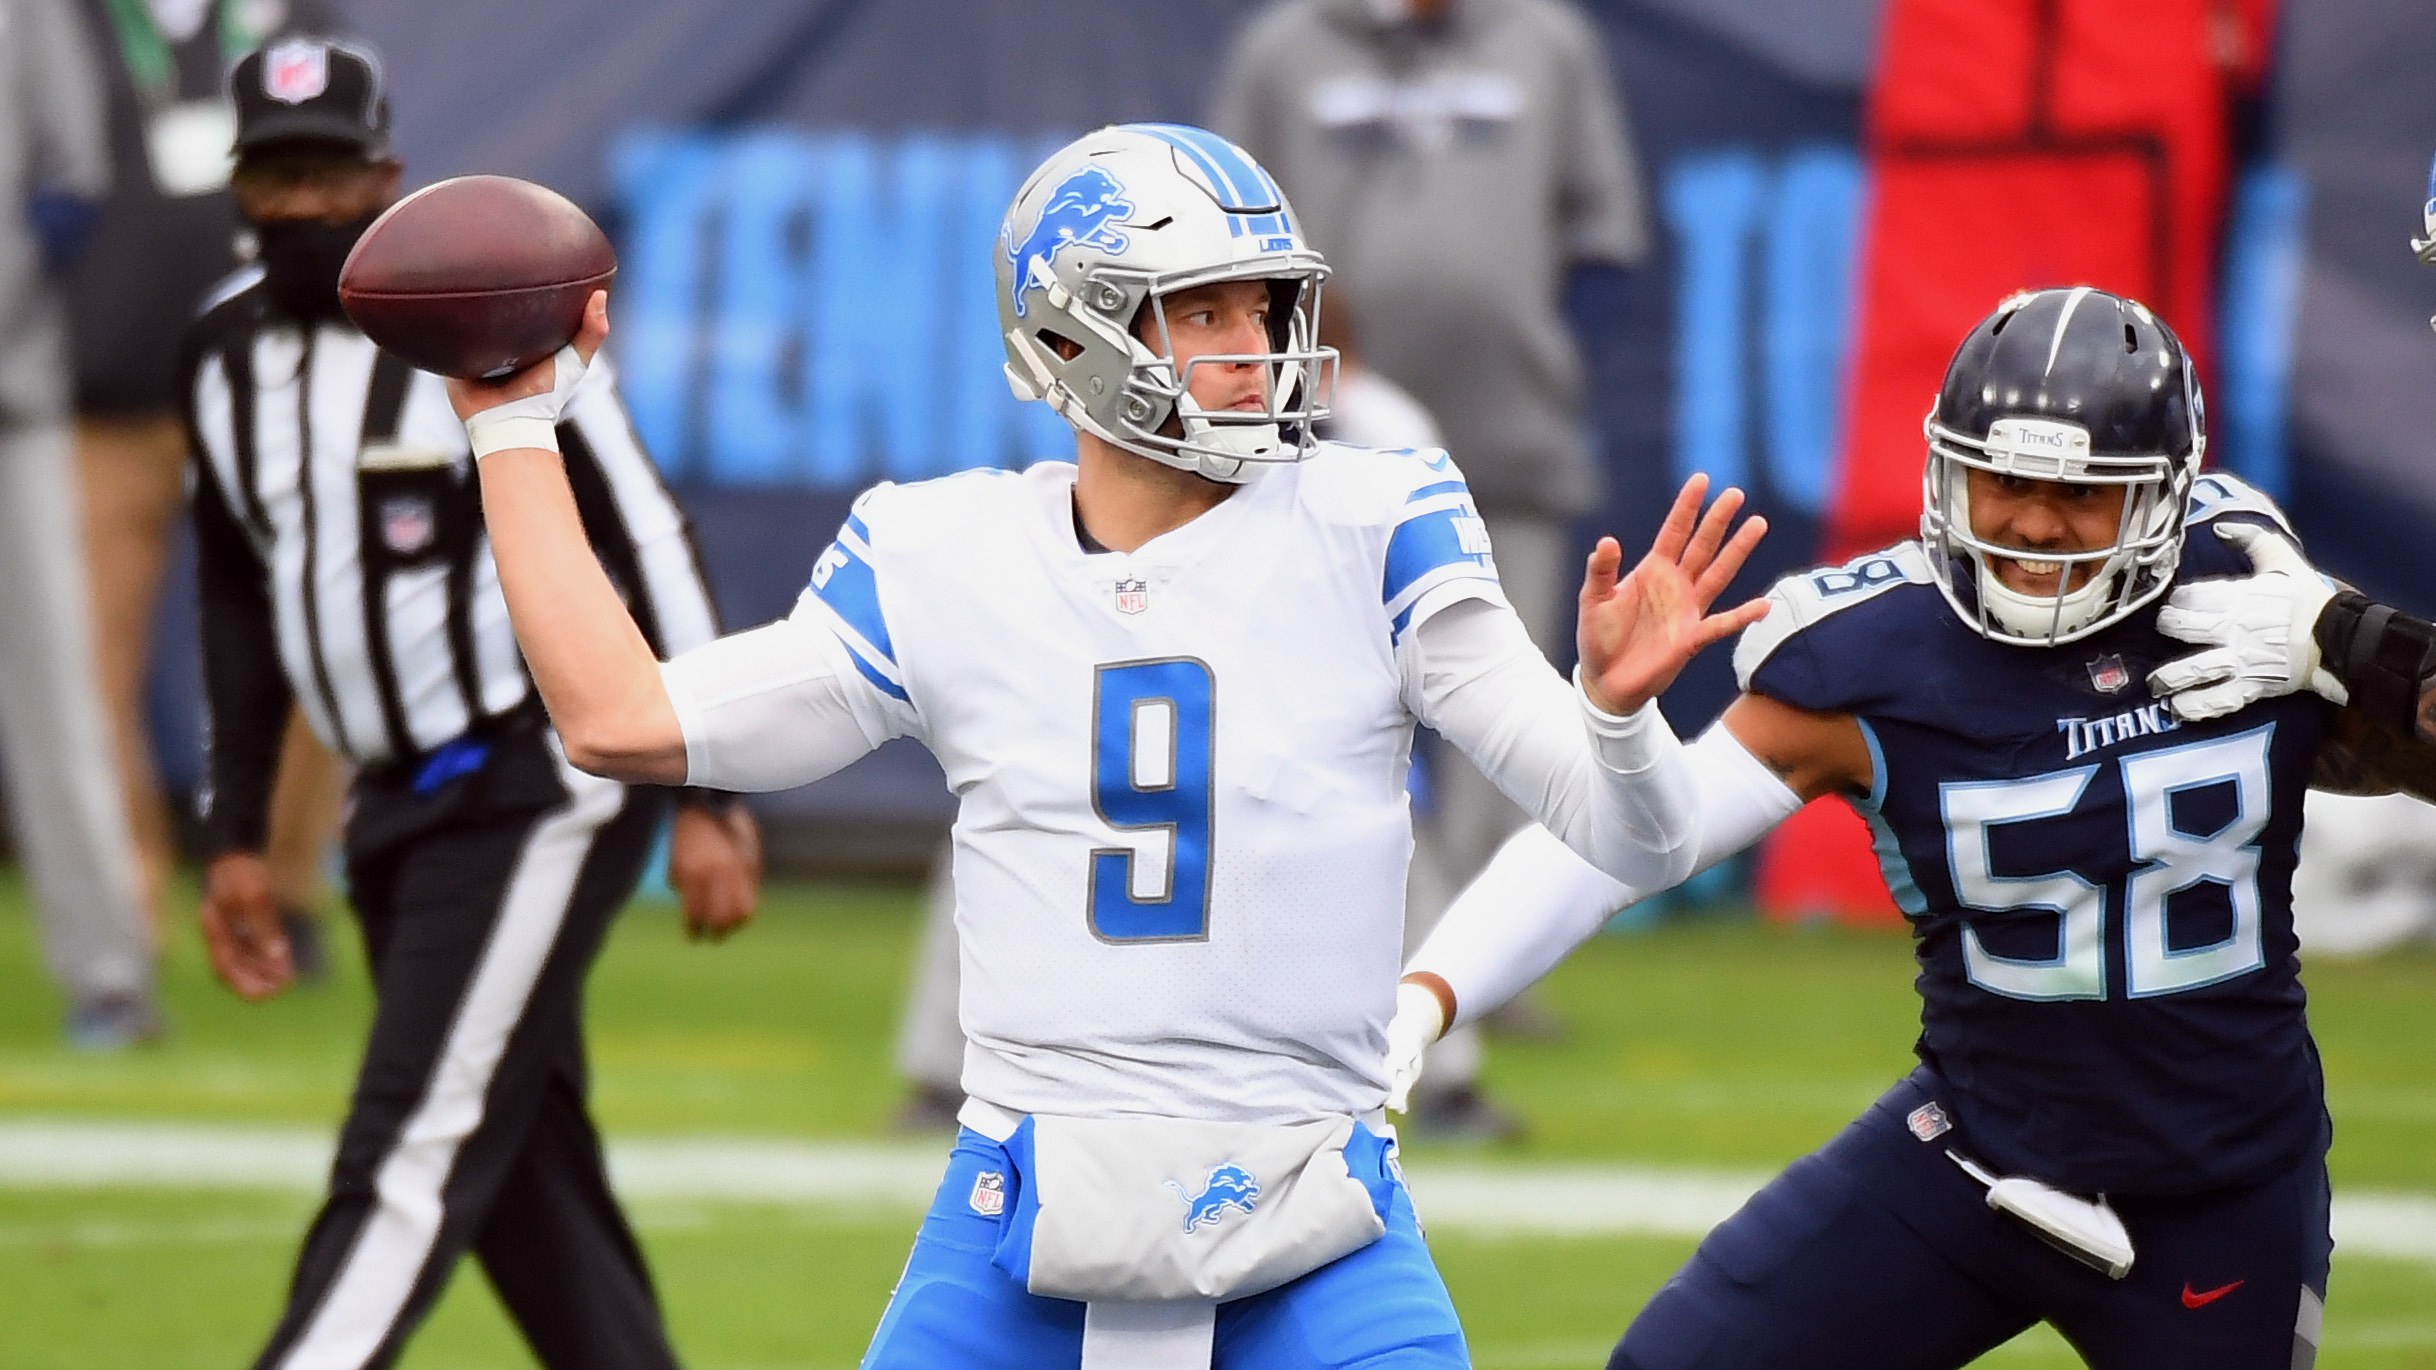 While Rams Got Stafford, Trading for Veteran QBs Is Rarely a Championship Formula